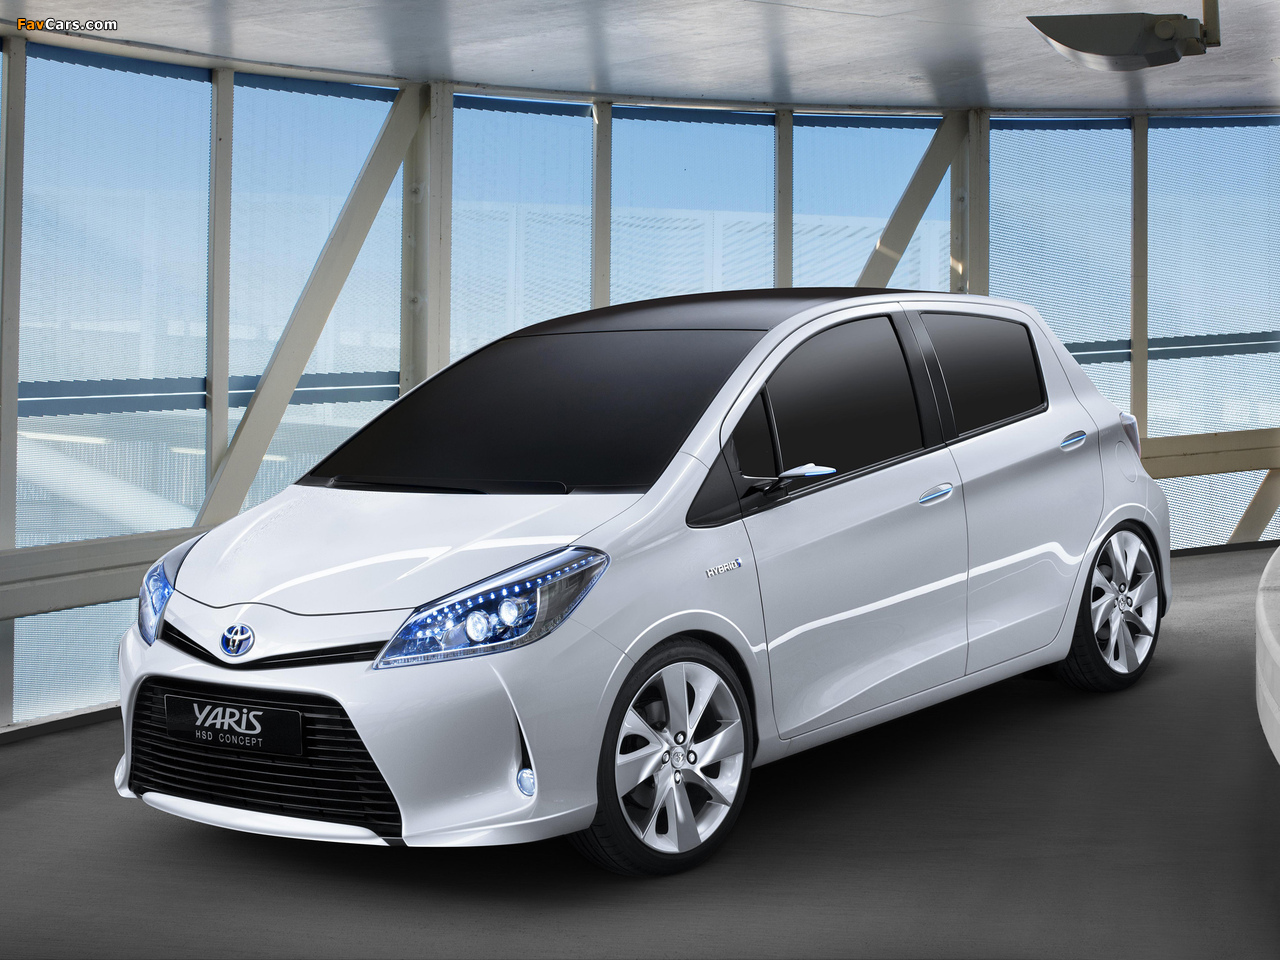 Toyota Yaris HSD Concept 2011 wallpapers (1280 x 960)